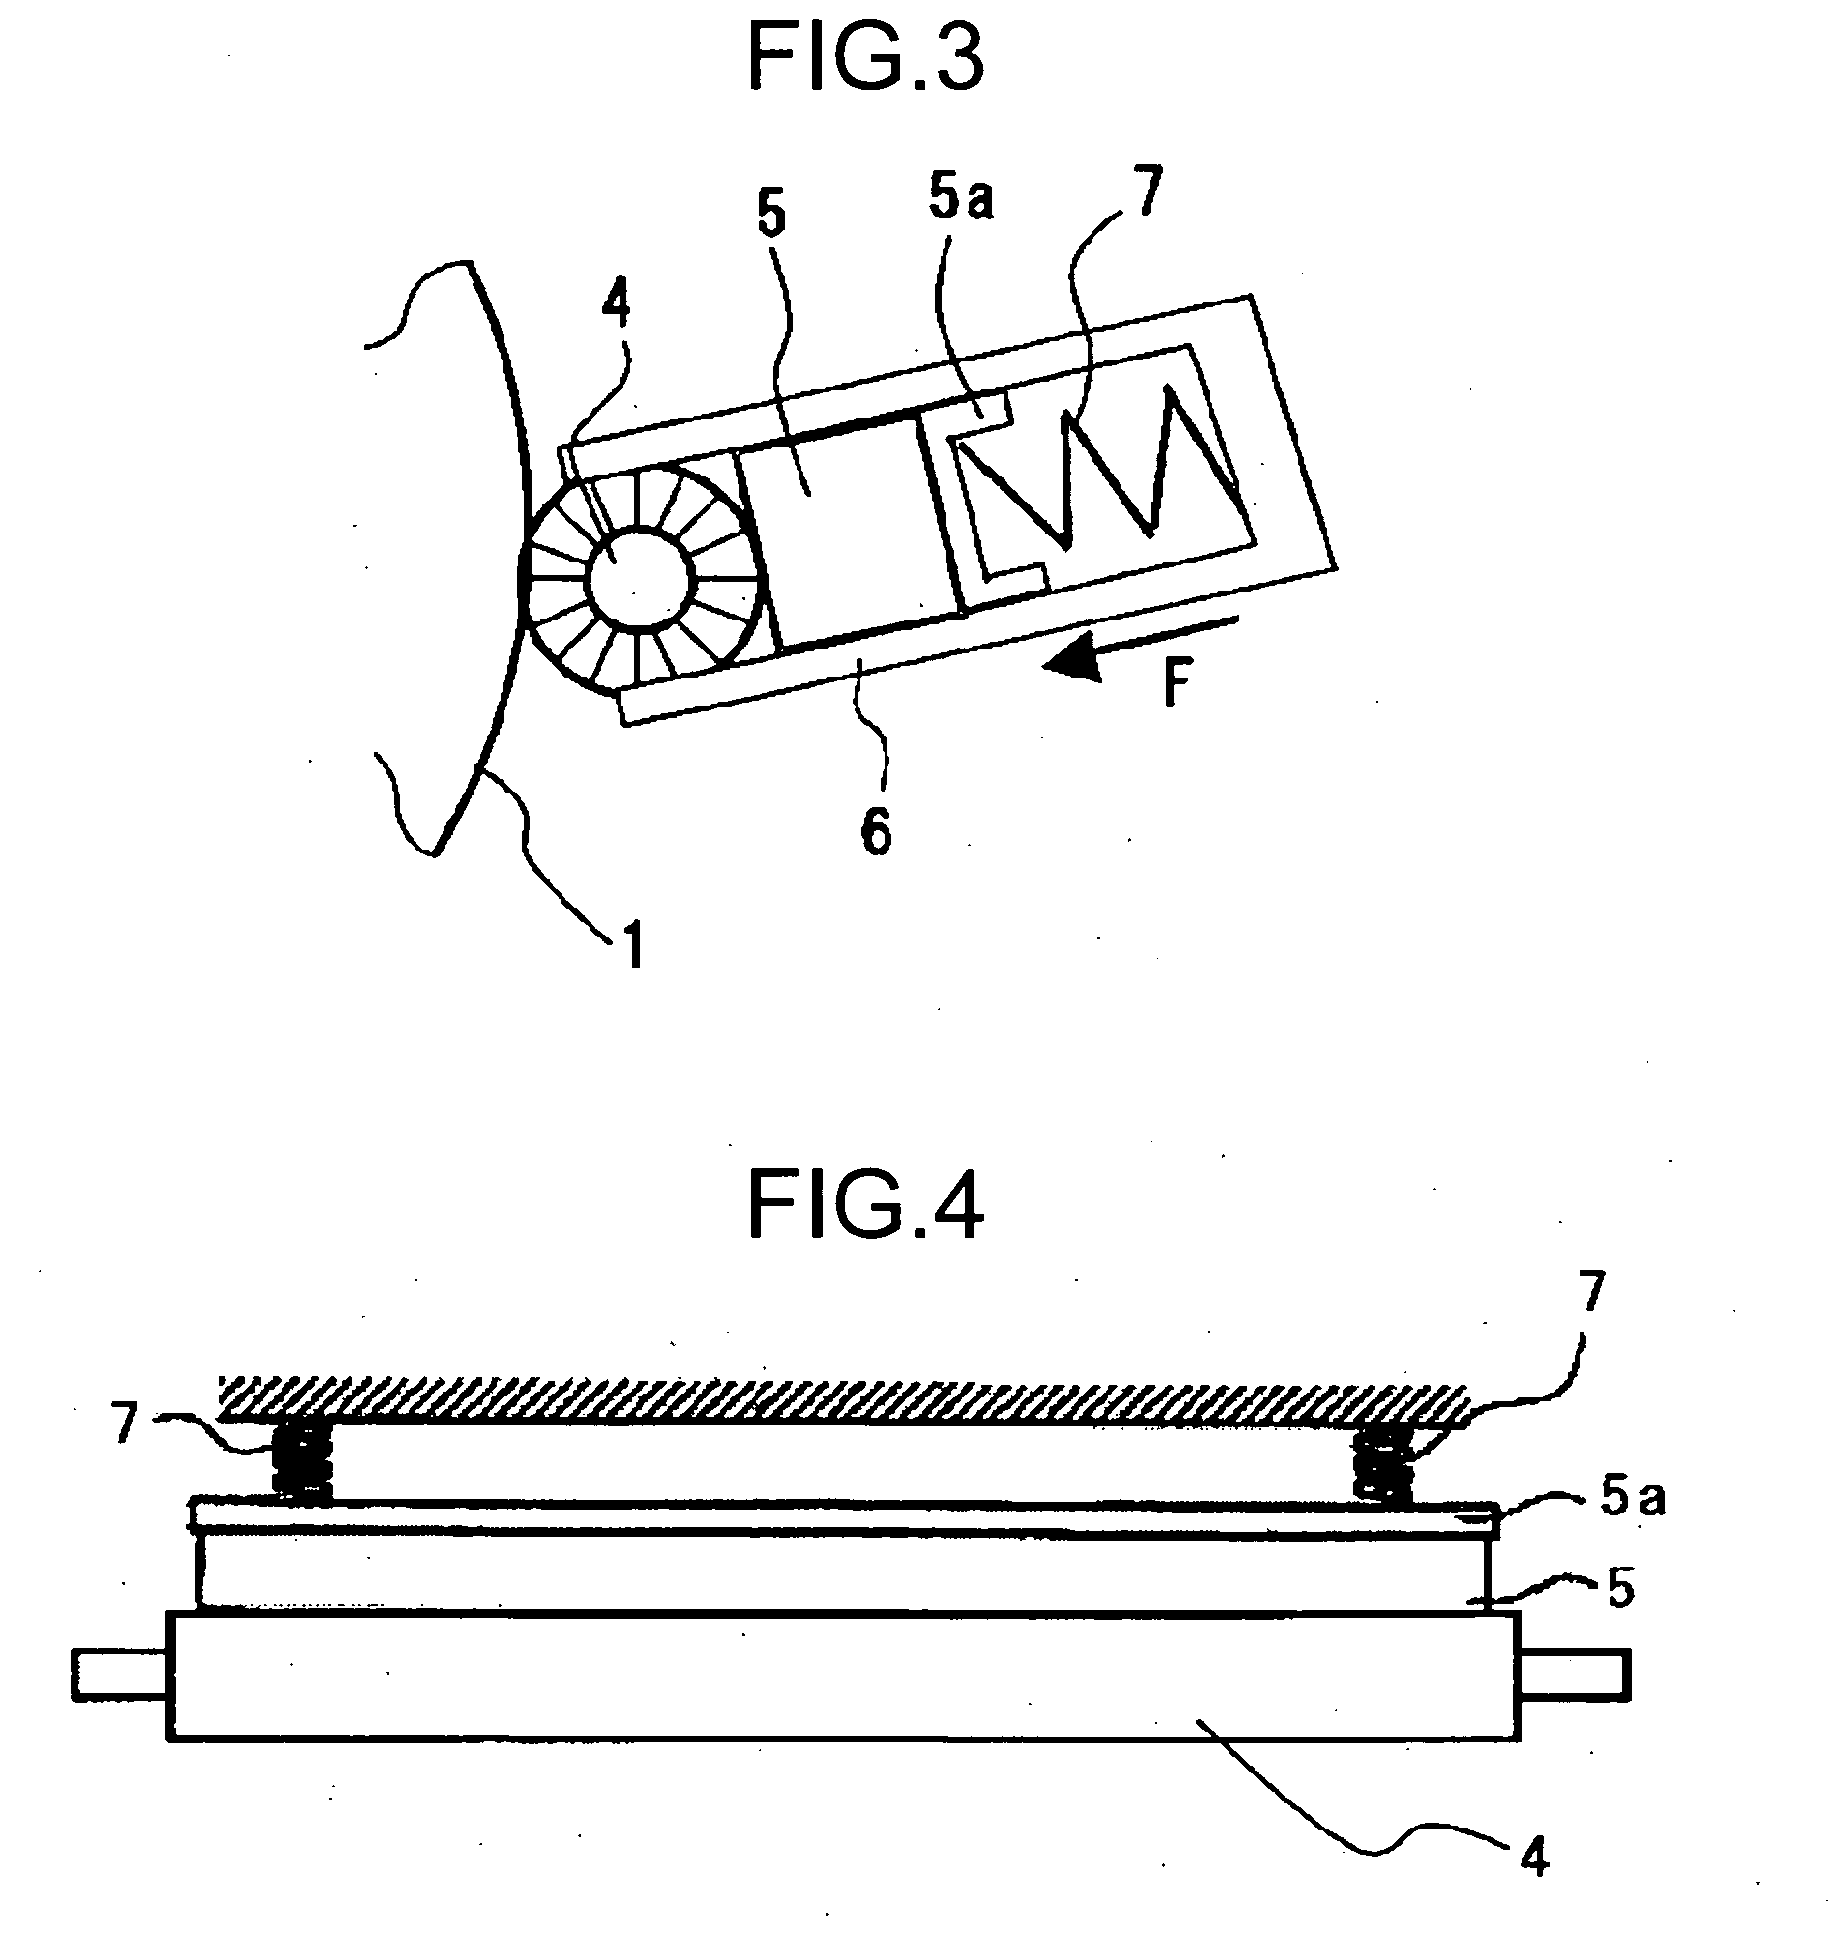 Lubricant applicator, image forming apparatus, and method of mounting lubricant applicator